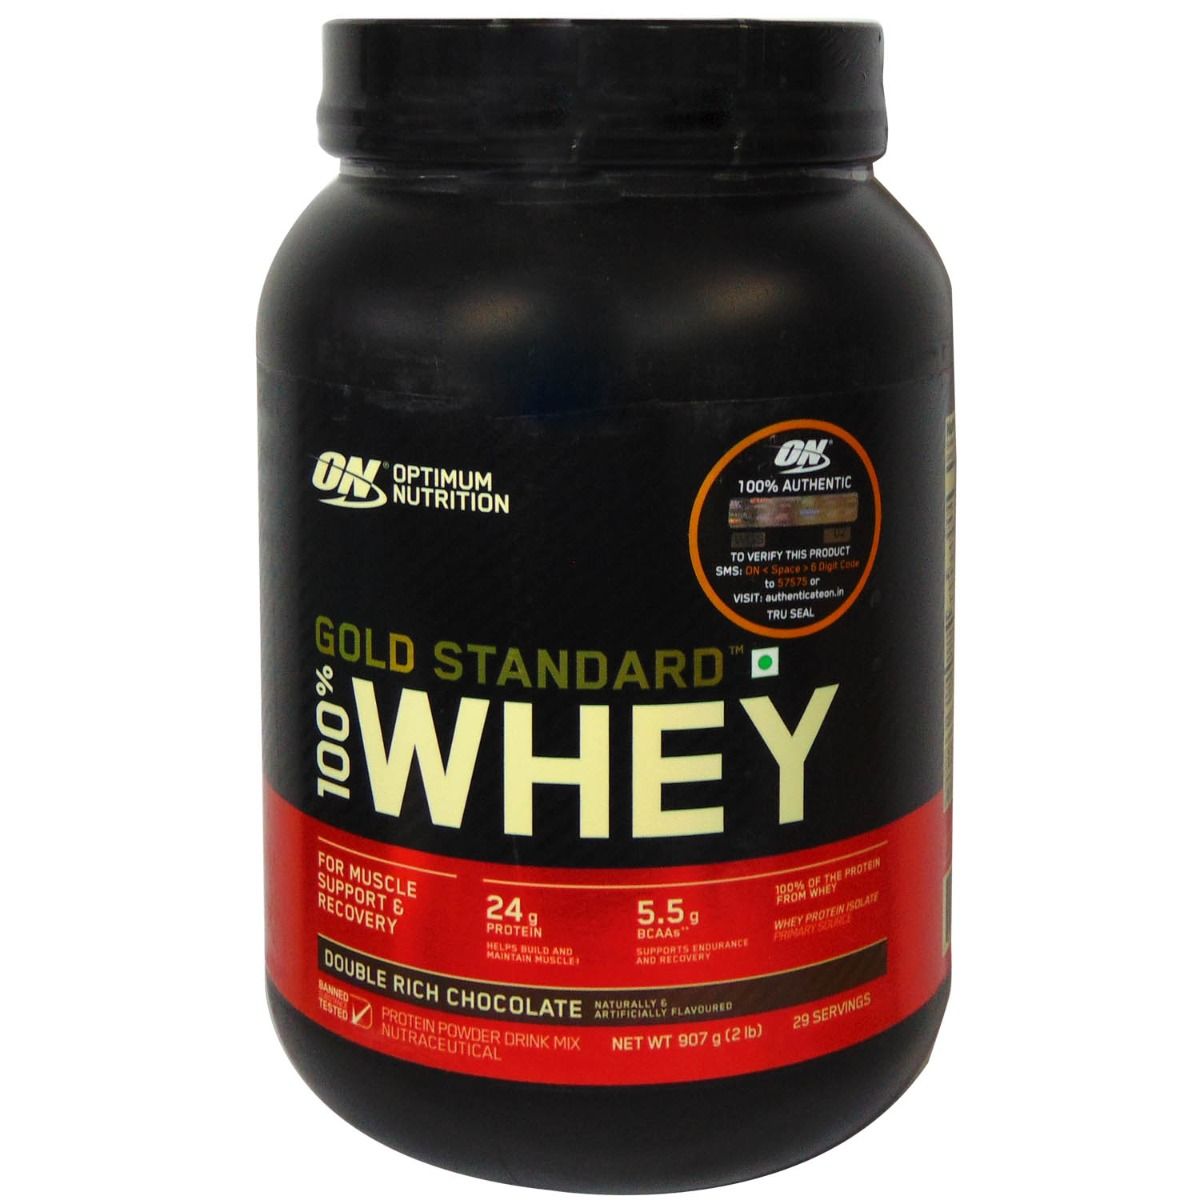 On Whey Protein Isolate Chocolate, 909 gm, Pack of 1 